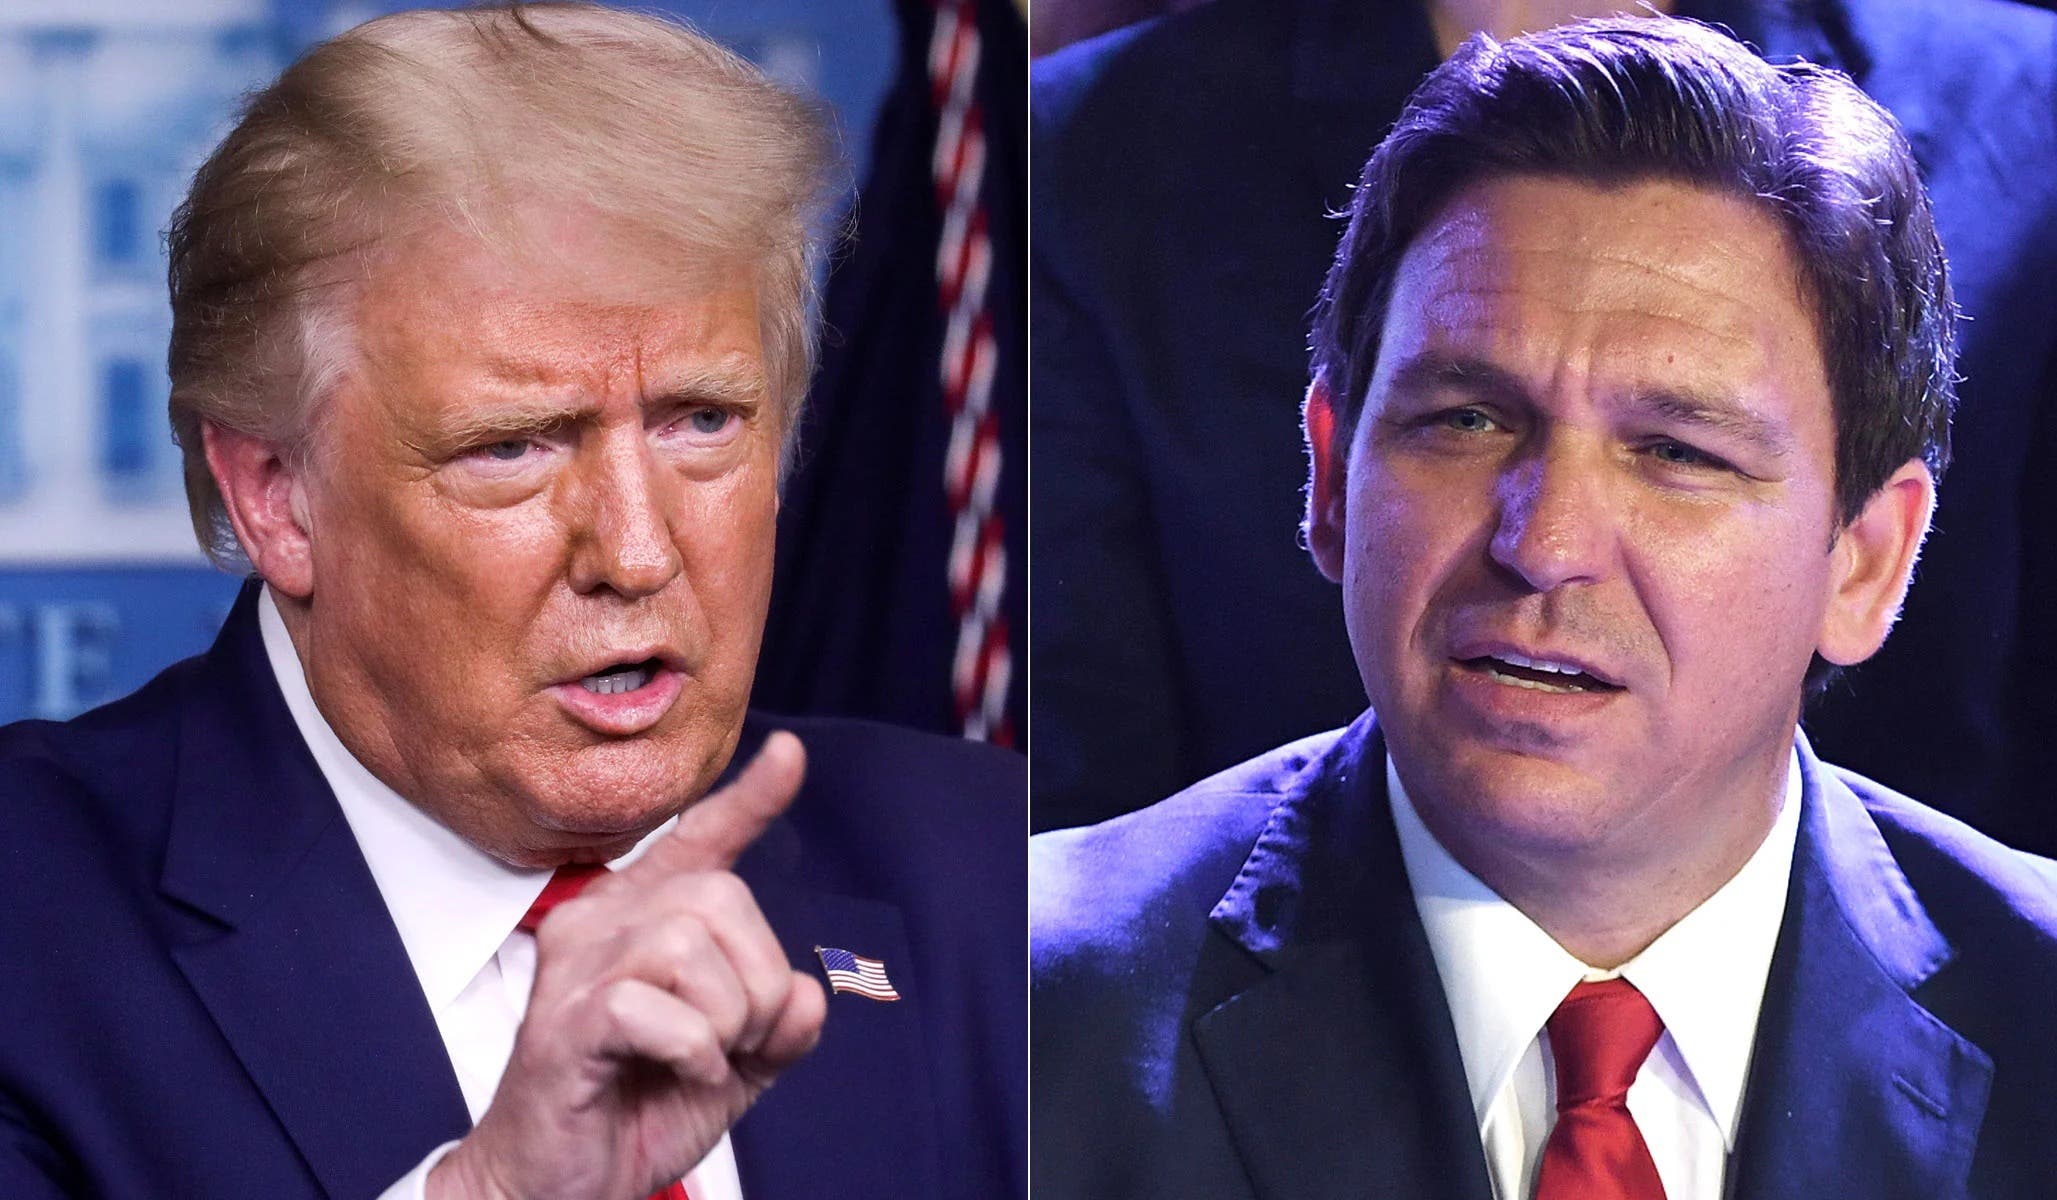 GLOVES OFF: Trump unleashes a FLURRY OF INSULTS against Ron DeSantis